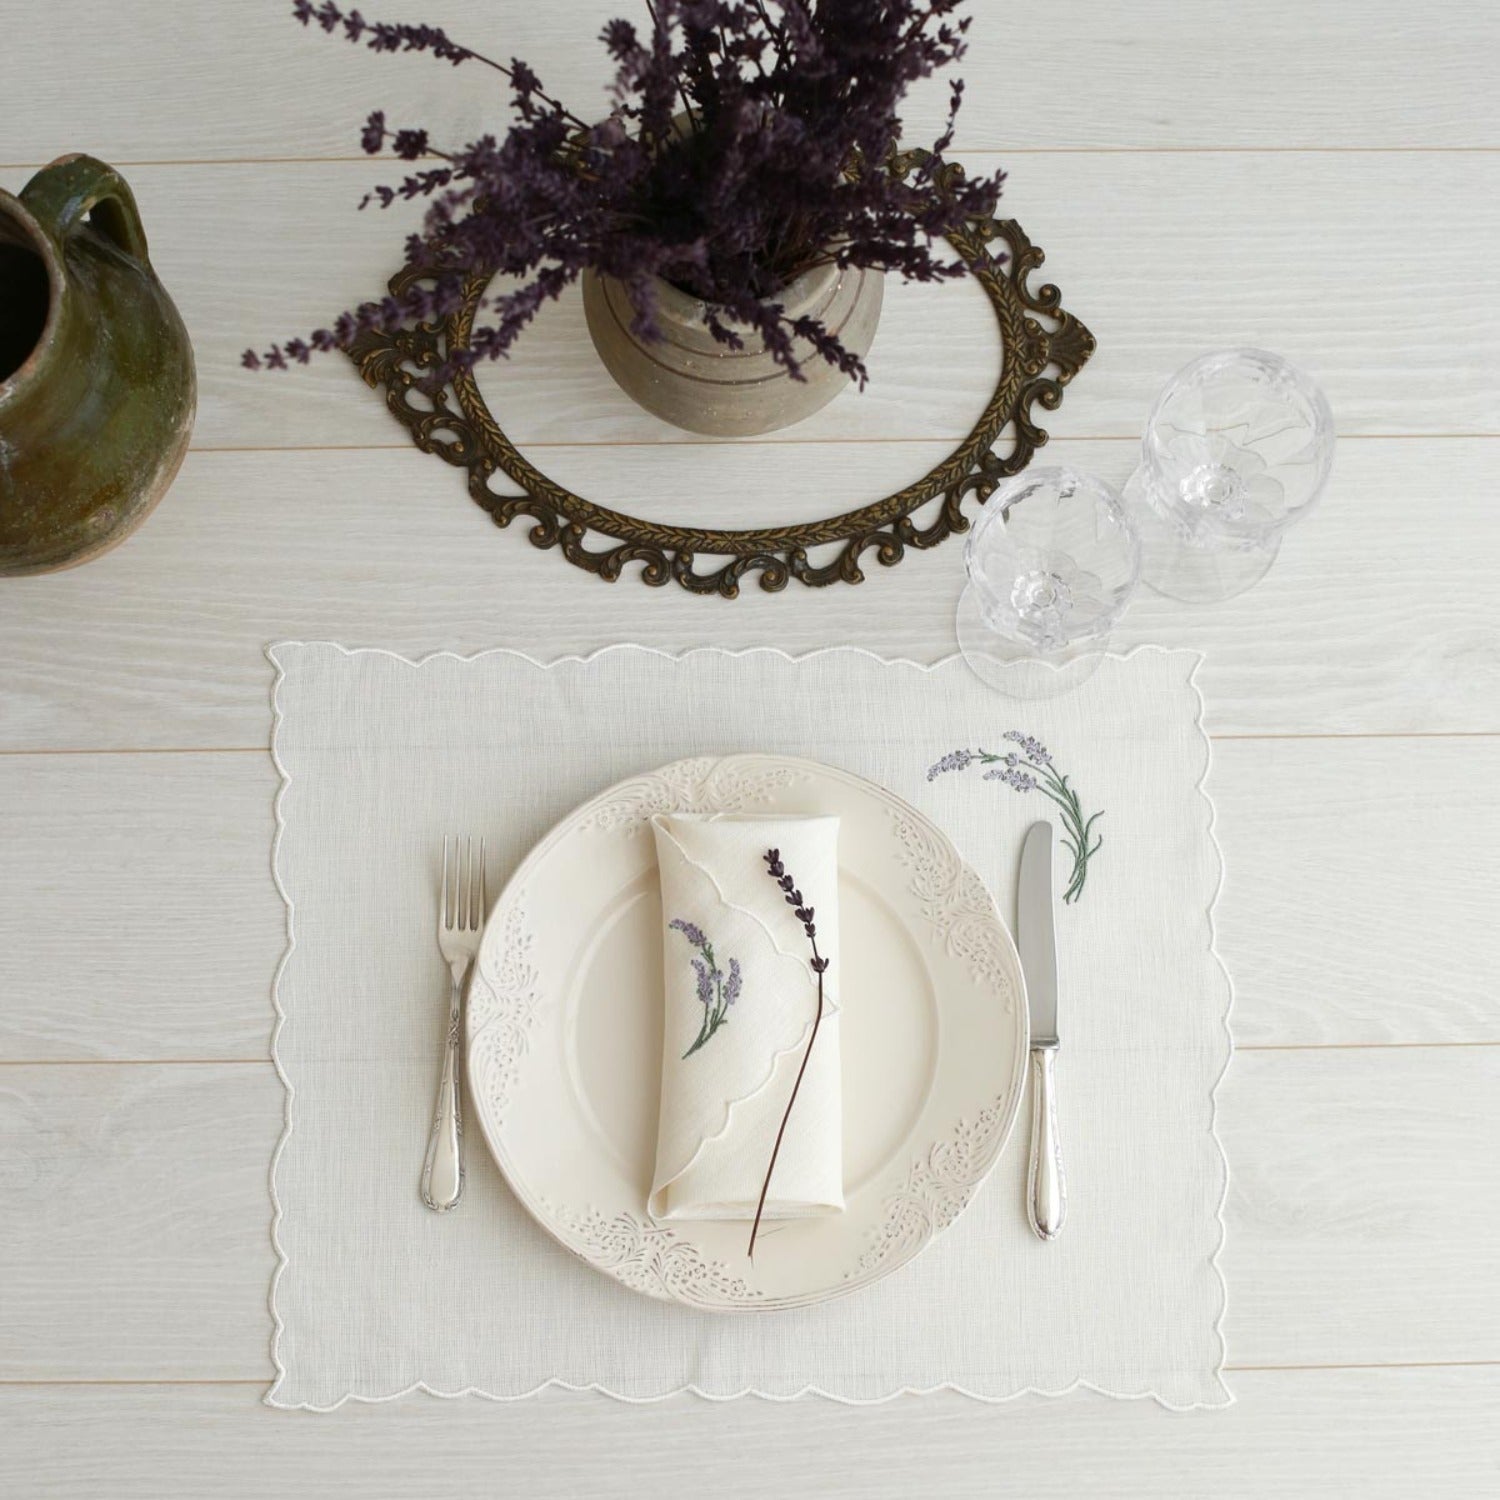 Lavender Embroidery Linen Placemats (Set of 2)